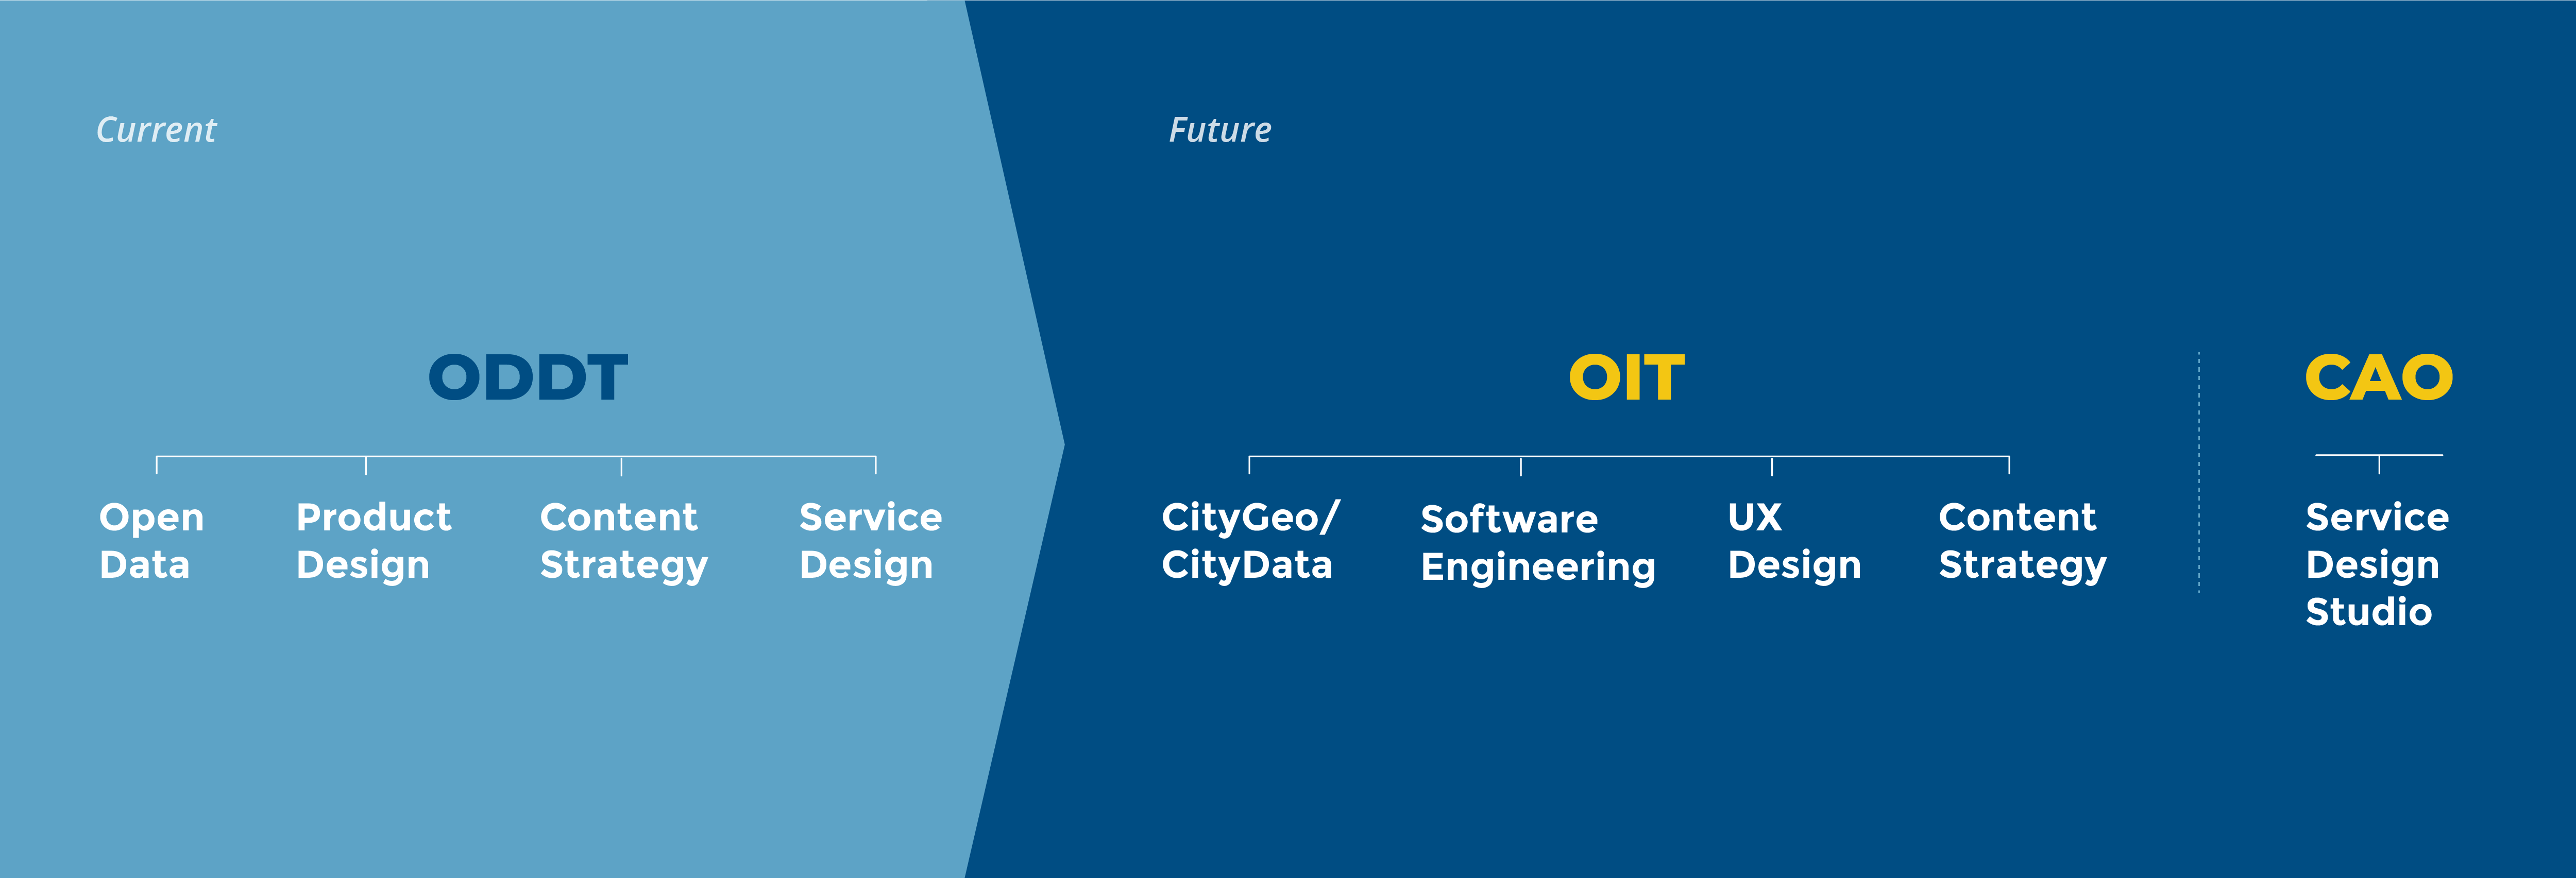 An image that maps the organizational shifts for ODDT, CAO, and OIT